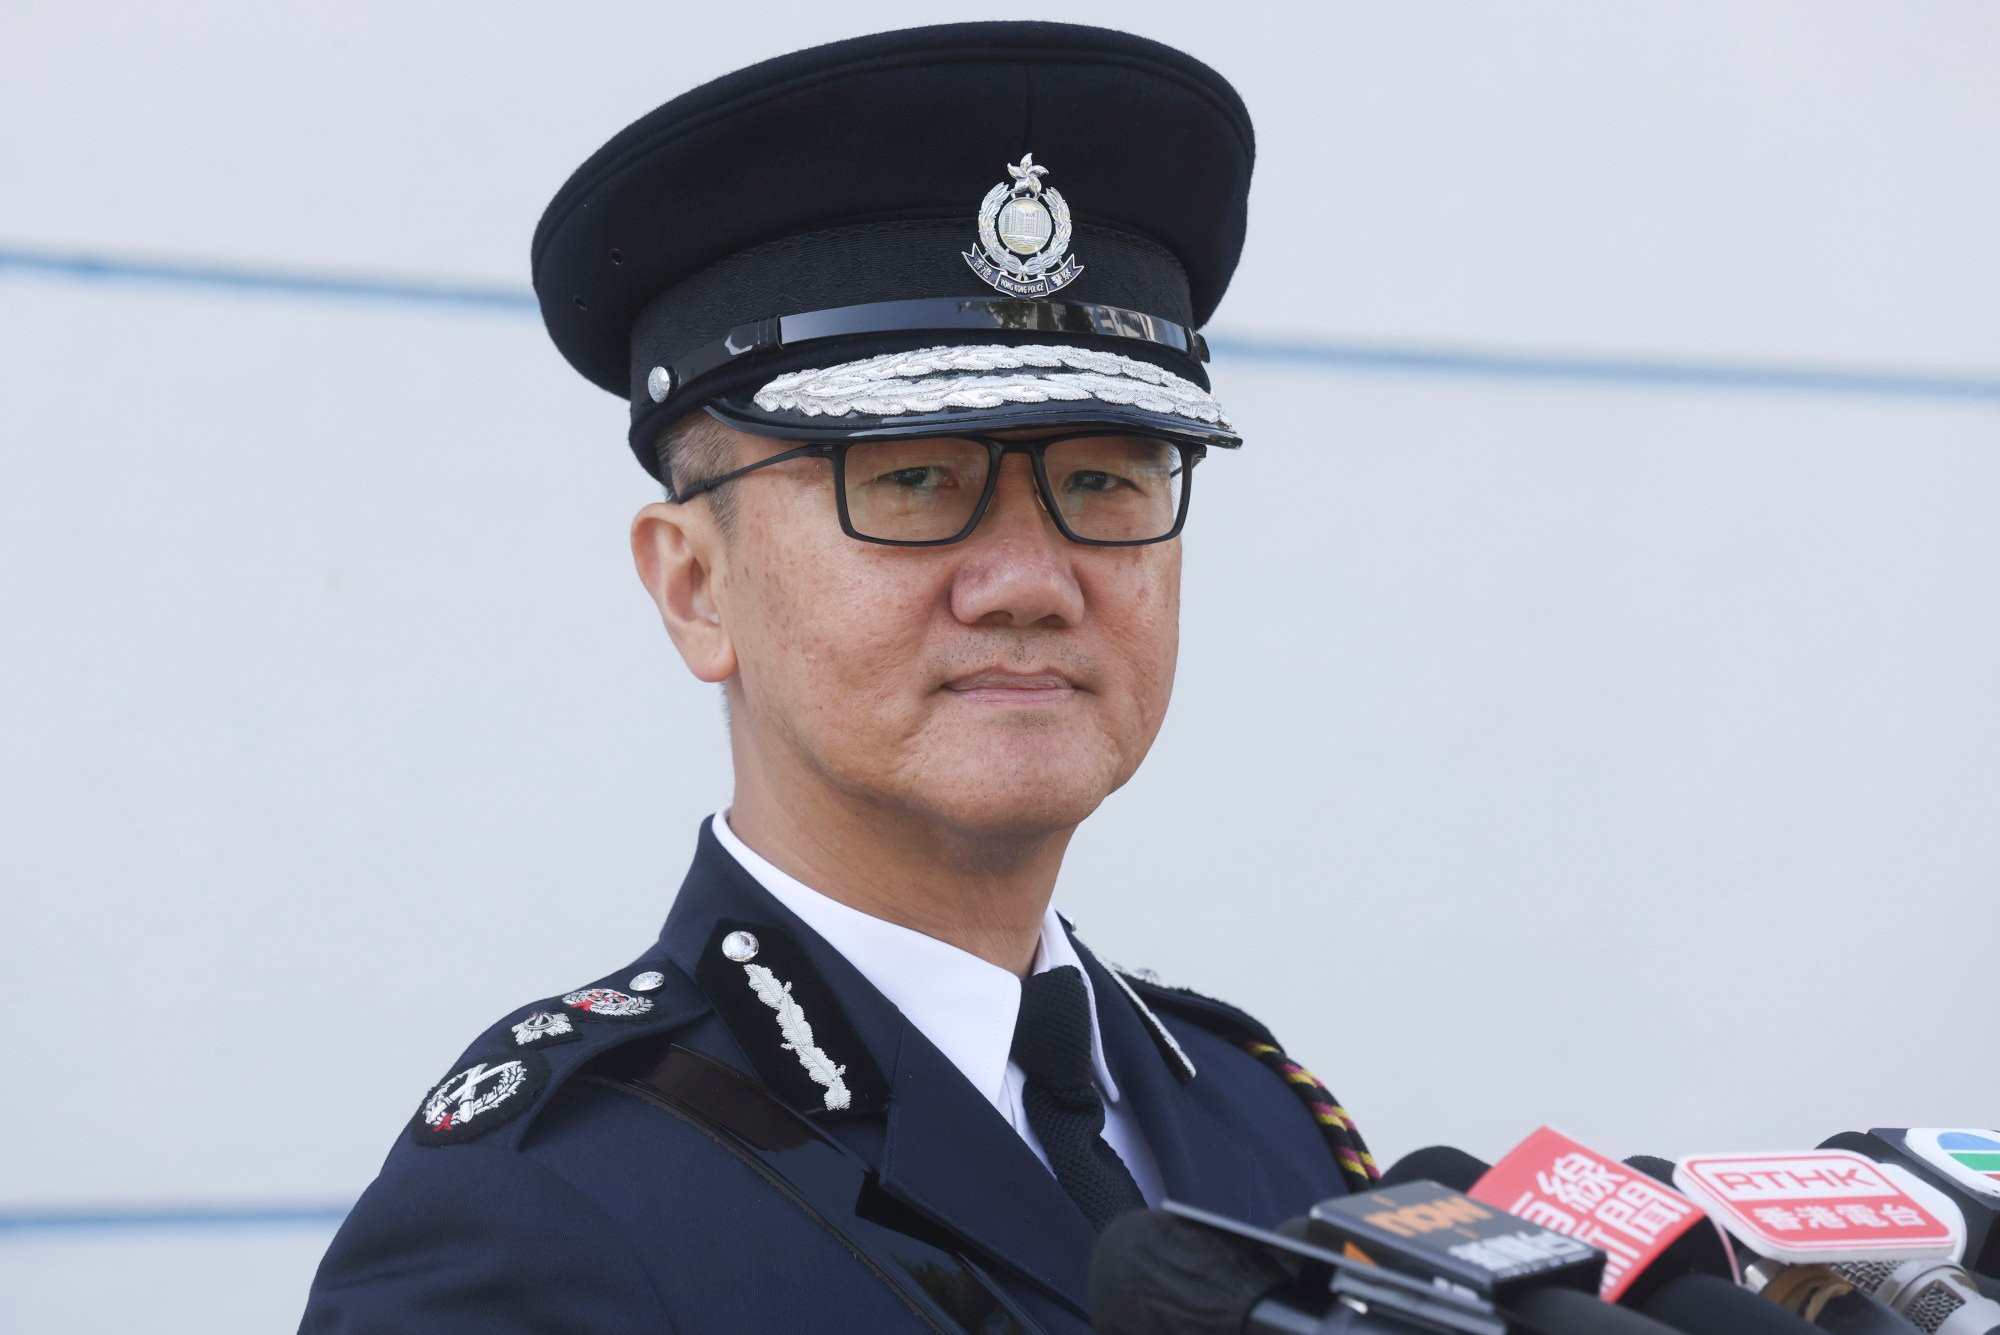 hong kong police to recruit 137 city students from mainland chinese universities following year-long talent attraction drive